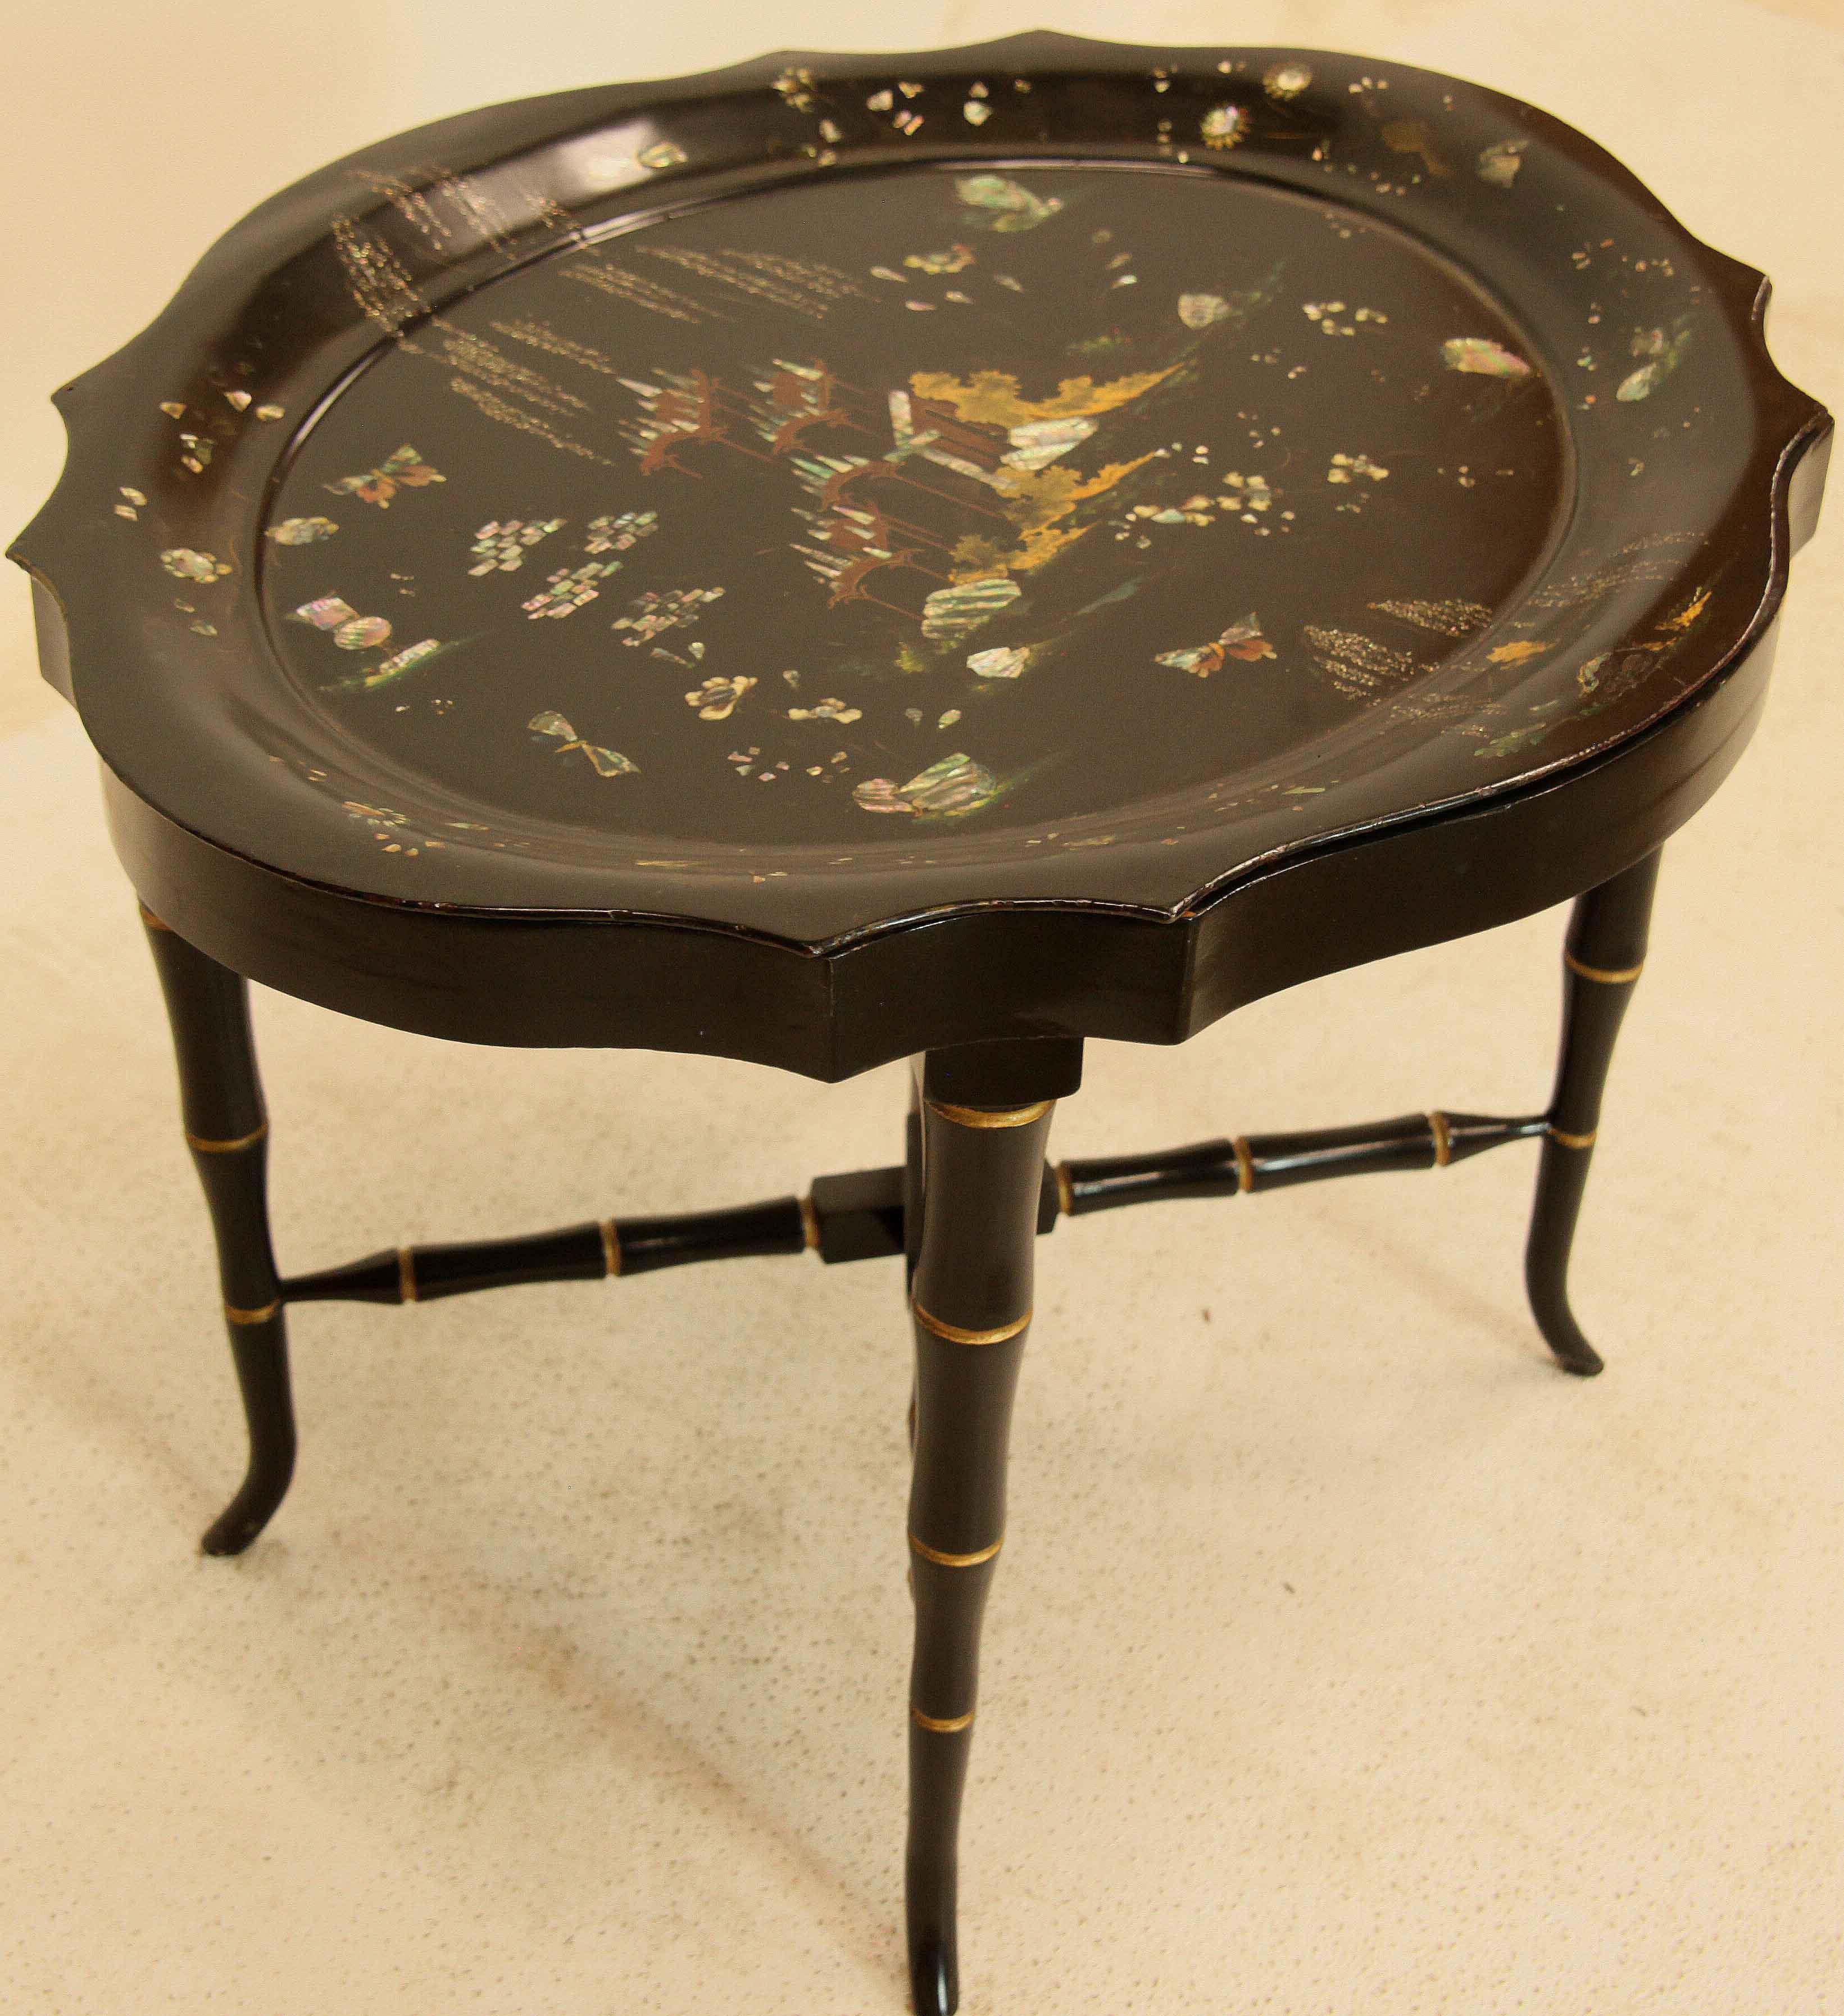 Black Lacquer tole tray table with scalloped edges has Japanese influence,  the border is decorated with dragon flies, stylized flowers and mother of pearl designs; the body of the tray with similar dragon flies, butter flies, flowers and mother of